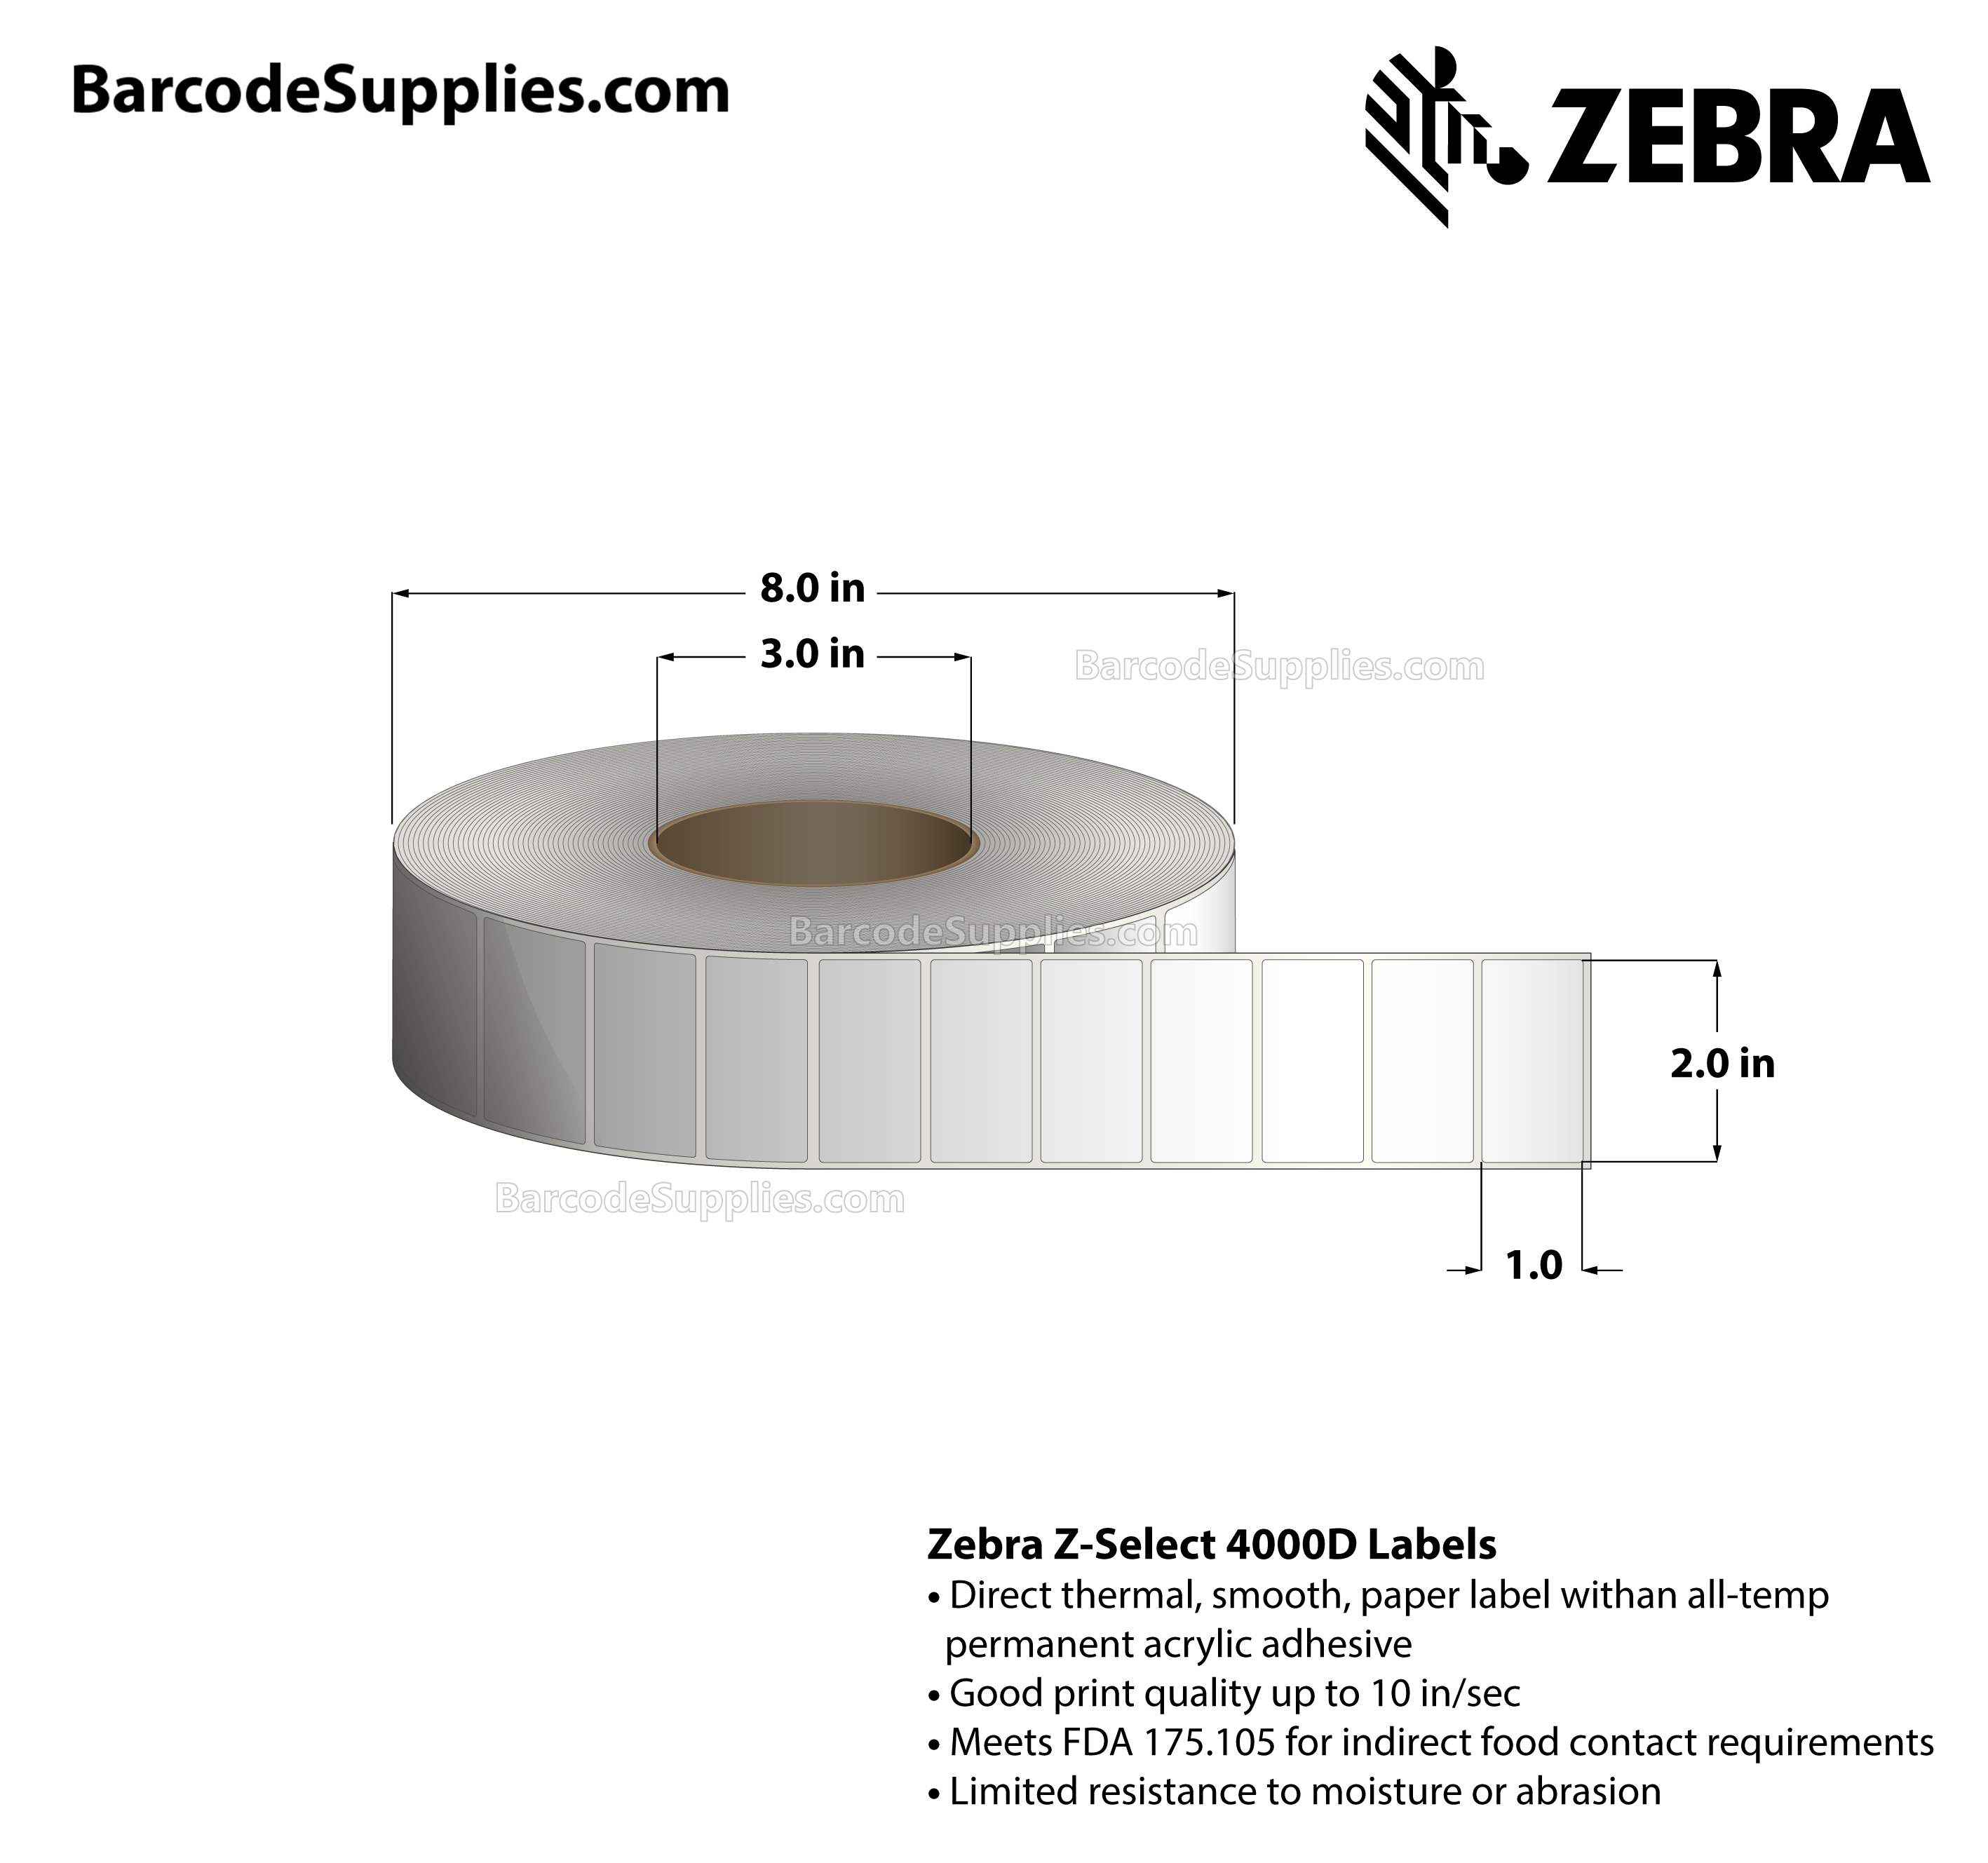 2 x 1 Direct Thermal White Z-Select 4000D Labels With All-Temp Adhesive - Not Perforated - 4620 Labels Per Roll - Carton Of 8 Rolls - 36960 Labels Total - MPN: 72275